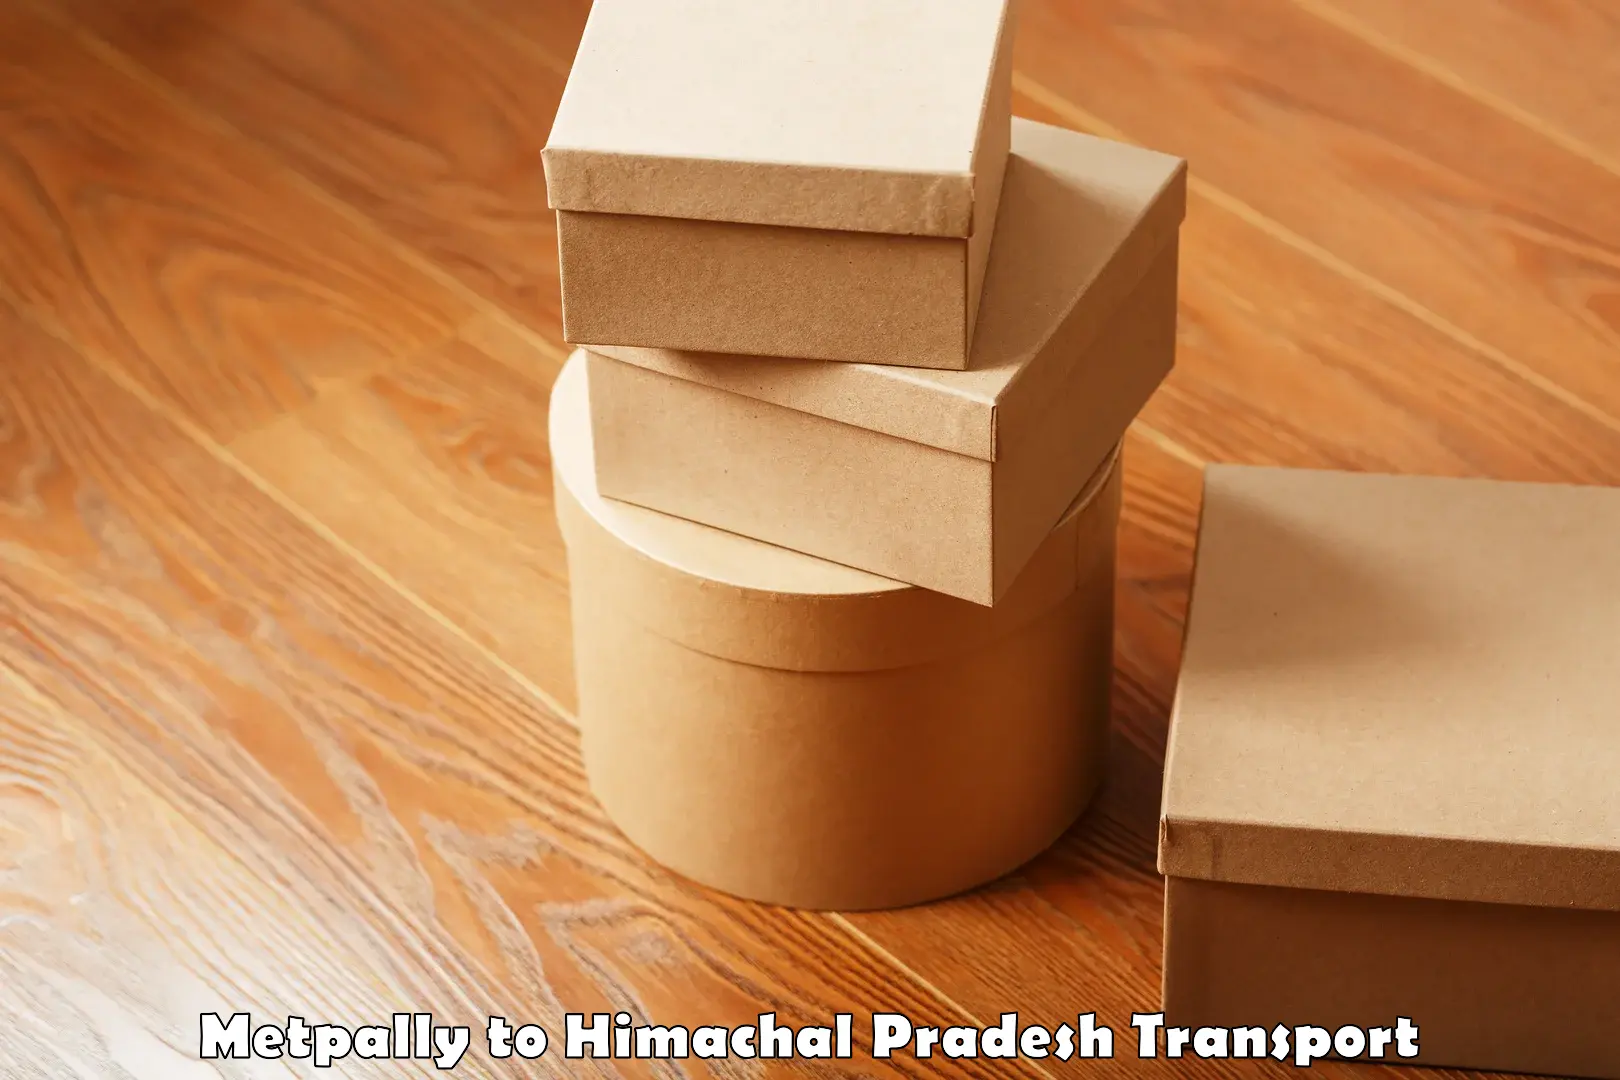 Truck transport companies in India Metpally to Chachyot